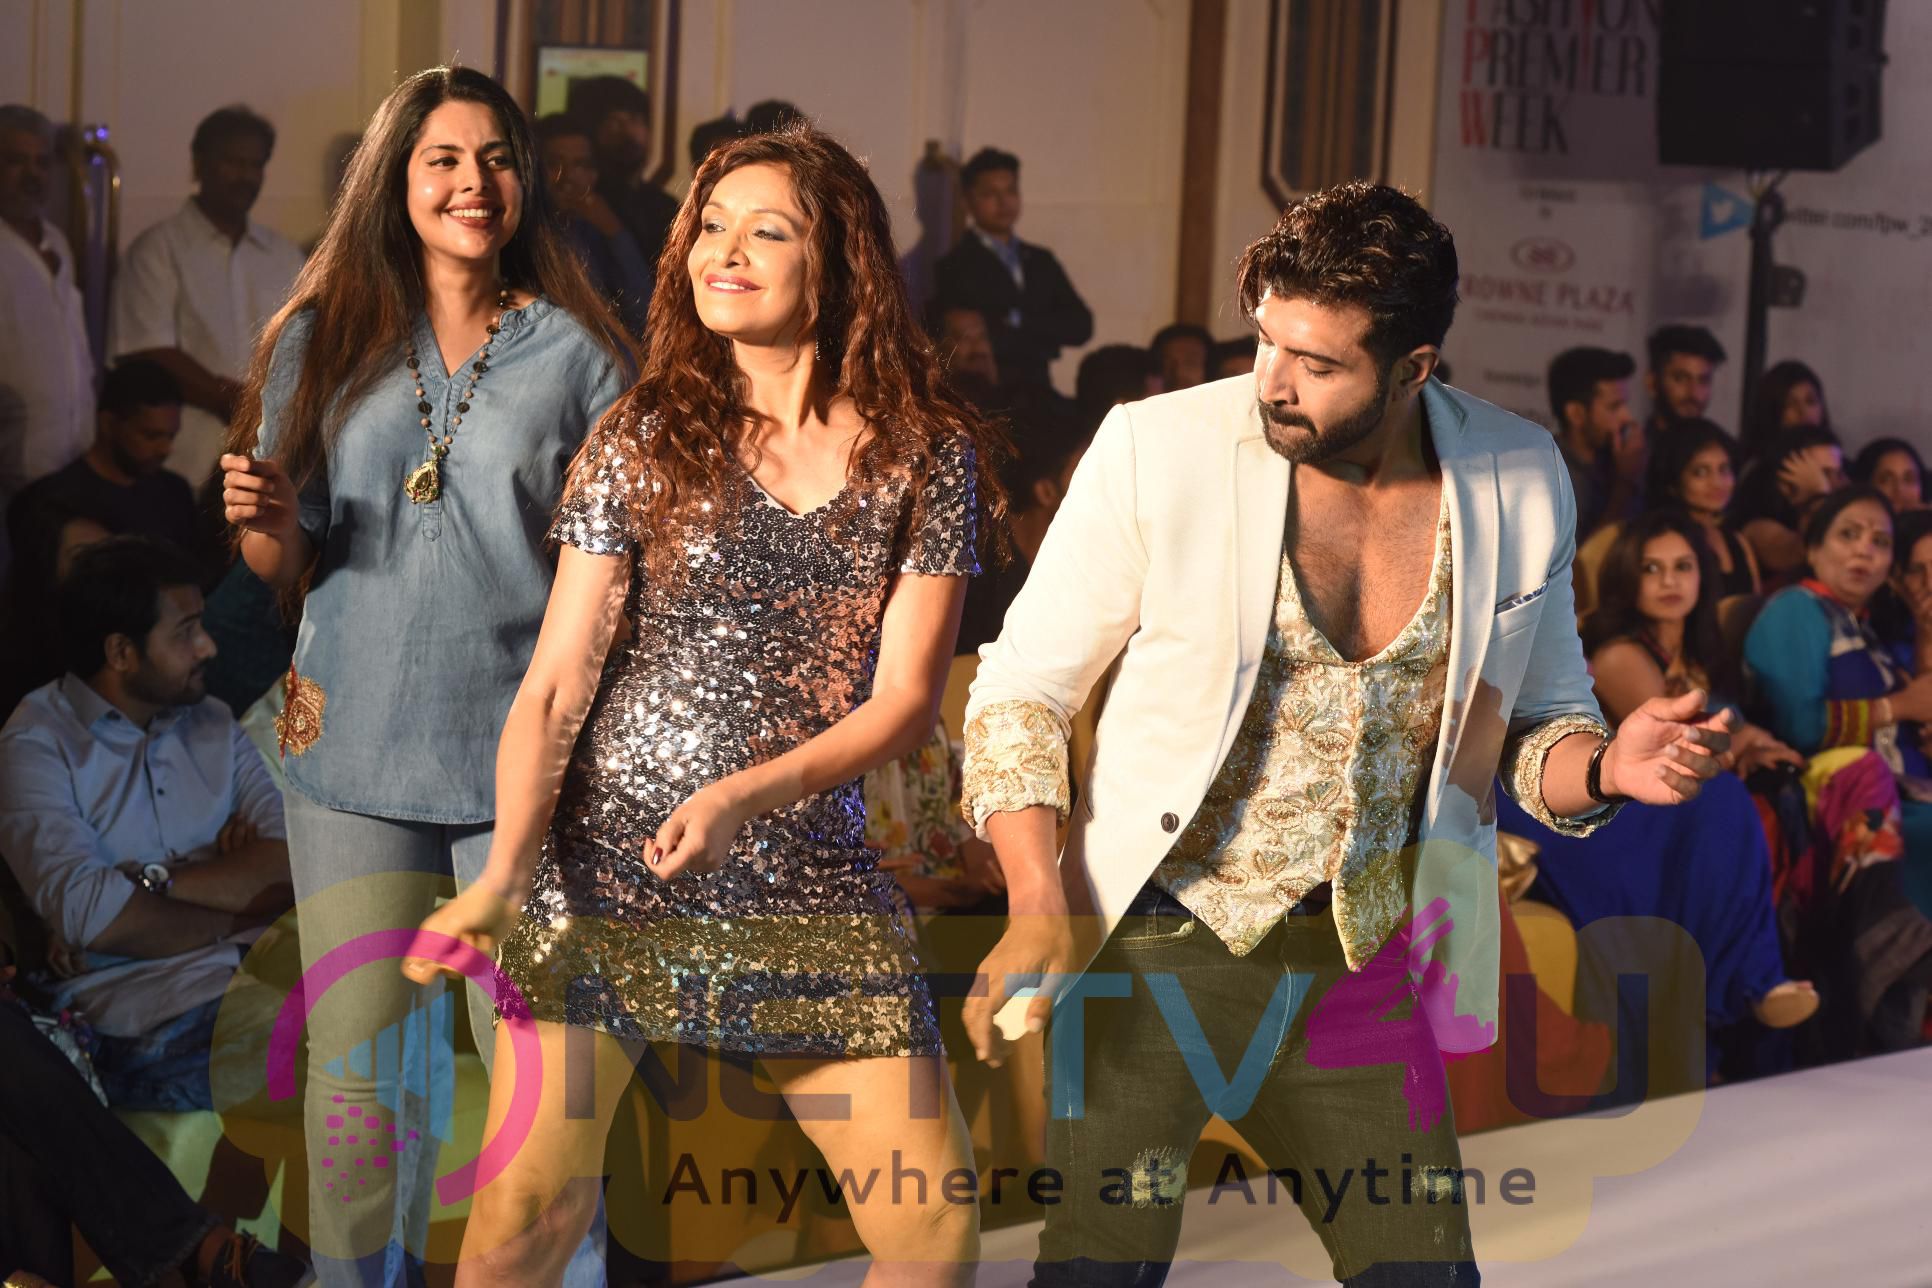  Brand Avatar Presents The Inaugural Edition Of Fashion Premier Week Photos Tamil Gallery